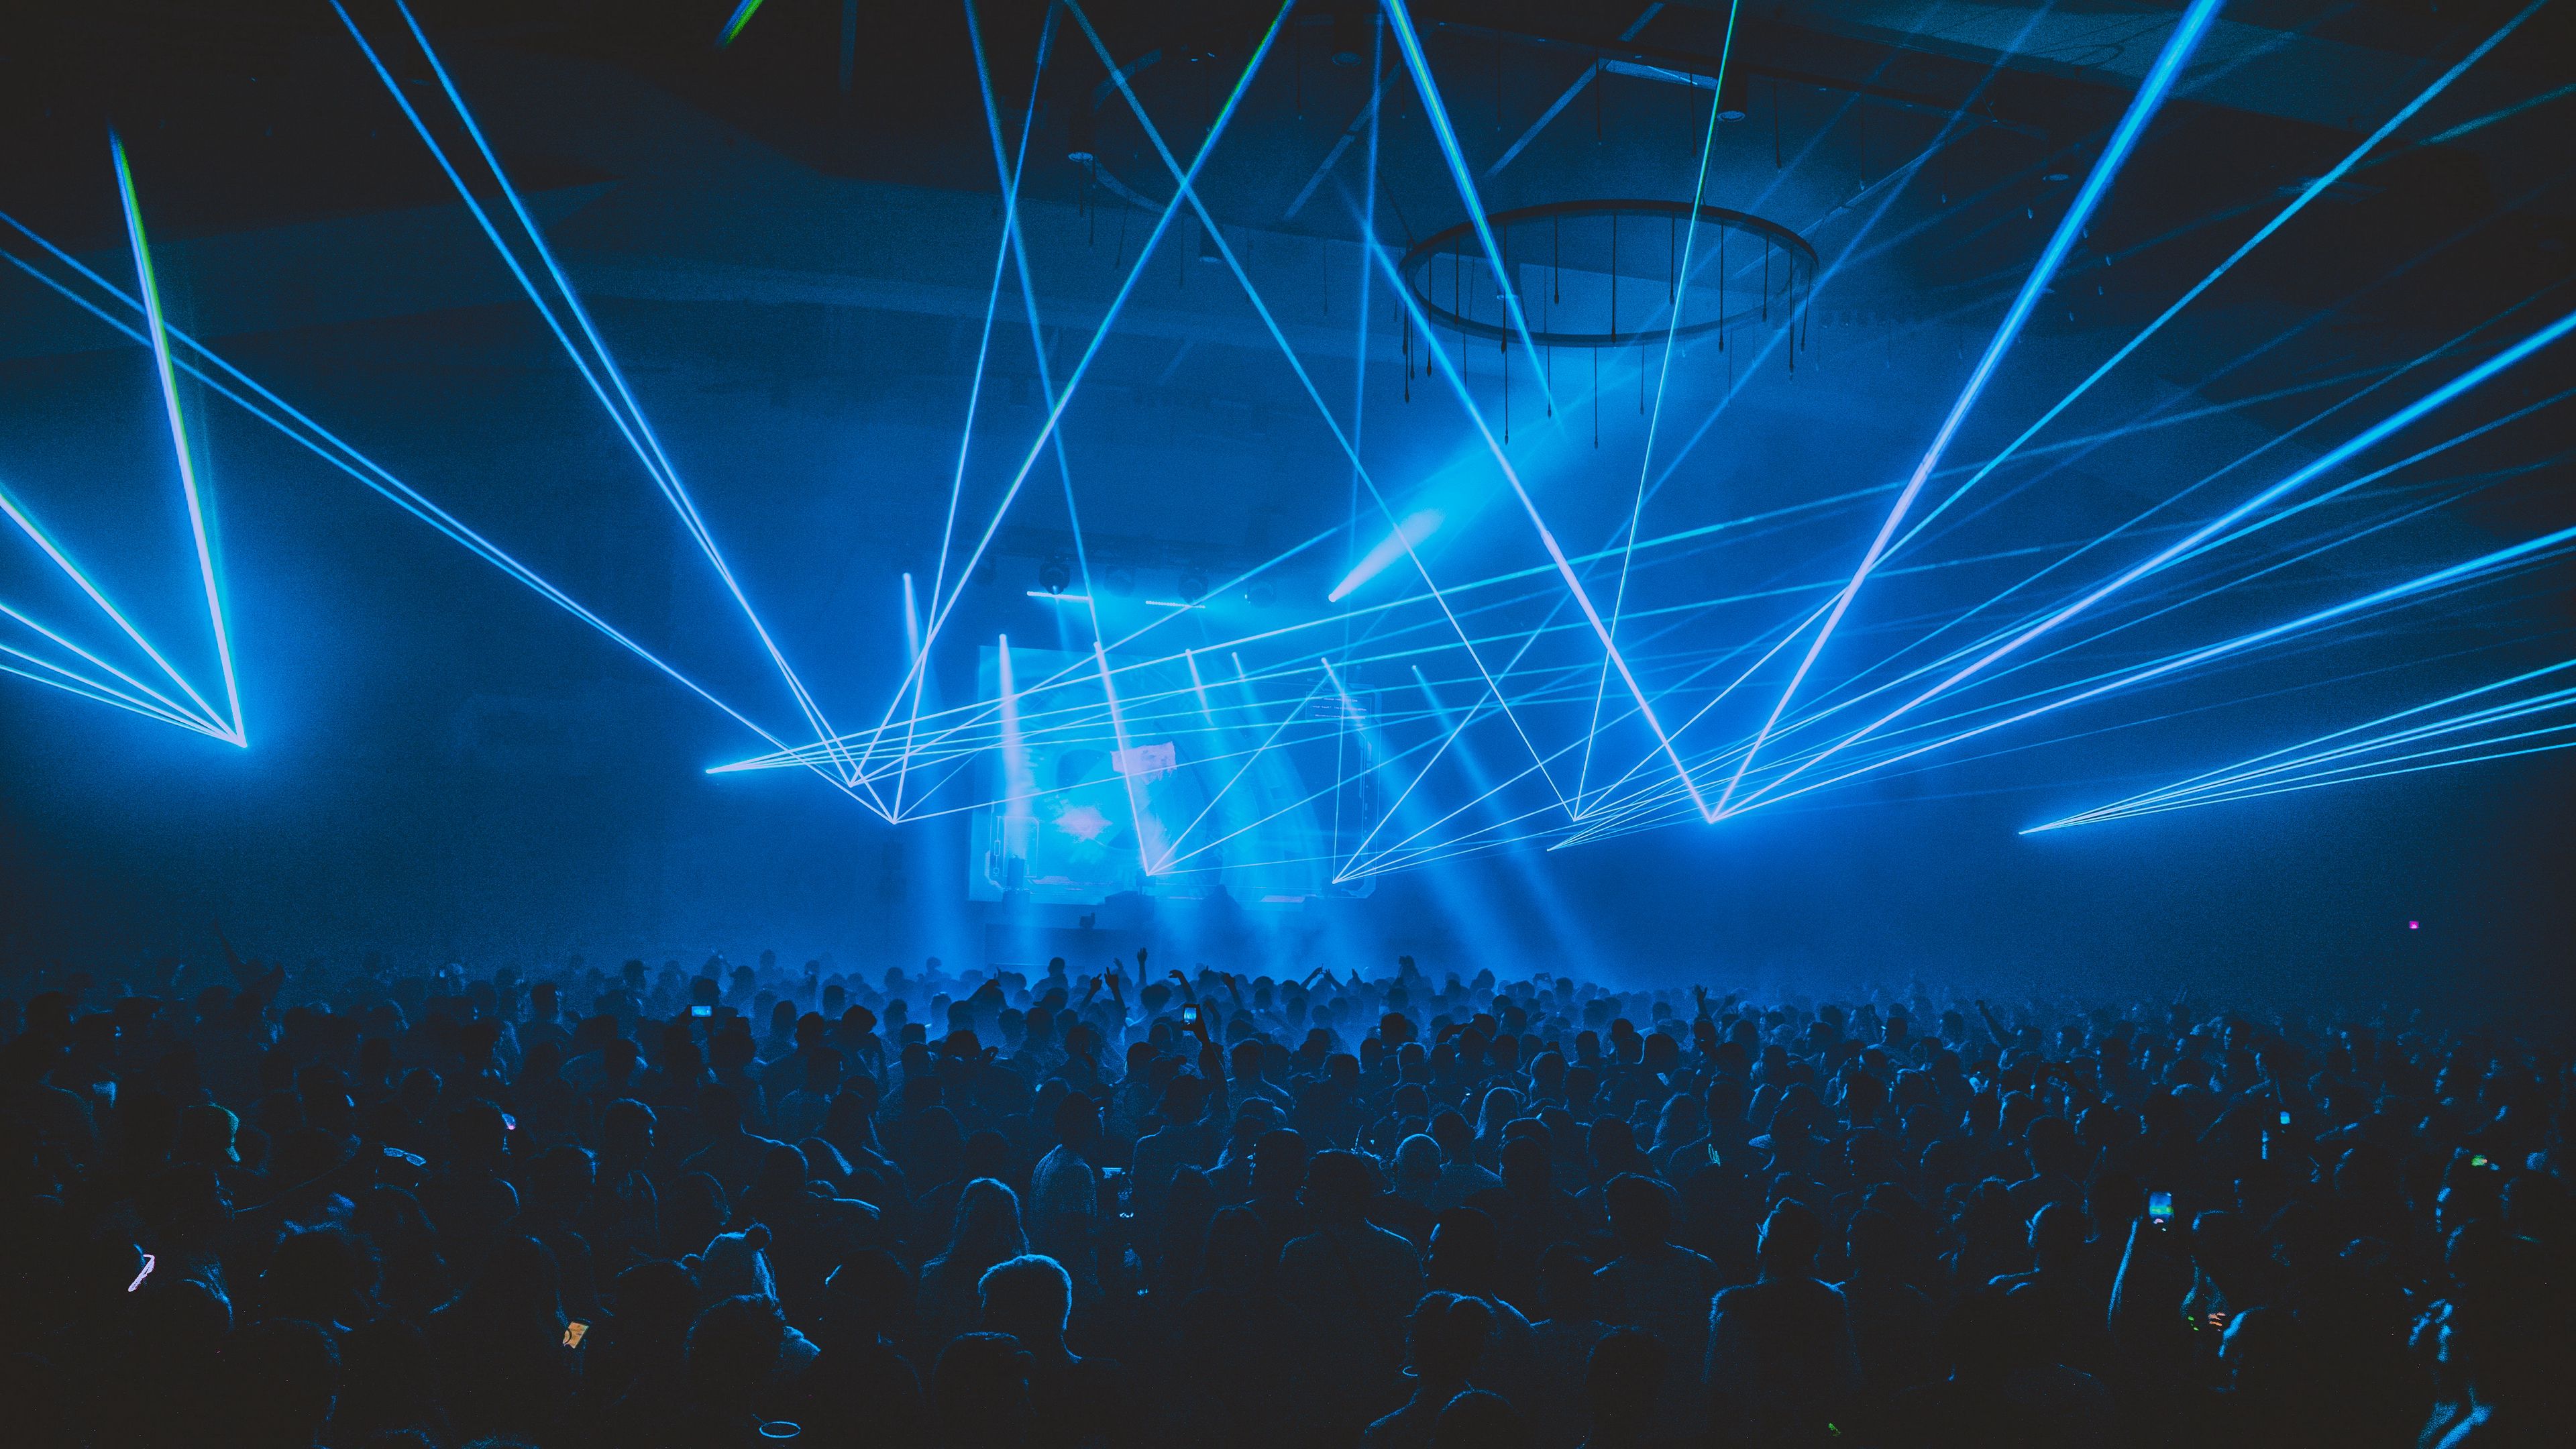 Download wallpaper 3840x2160 concert, crowd, people, light, laser, party 4k  uhd 16:9 hd background